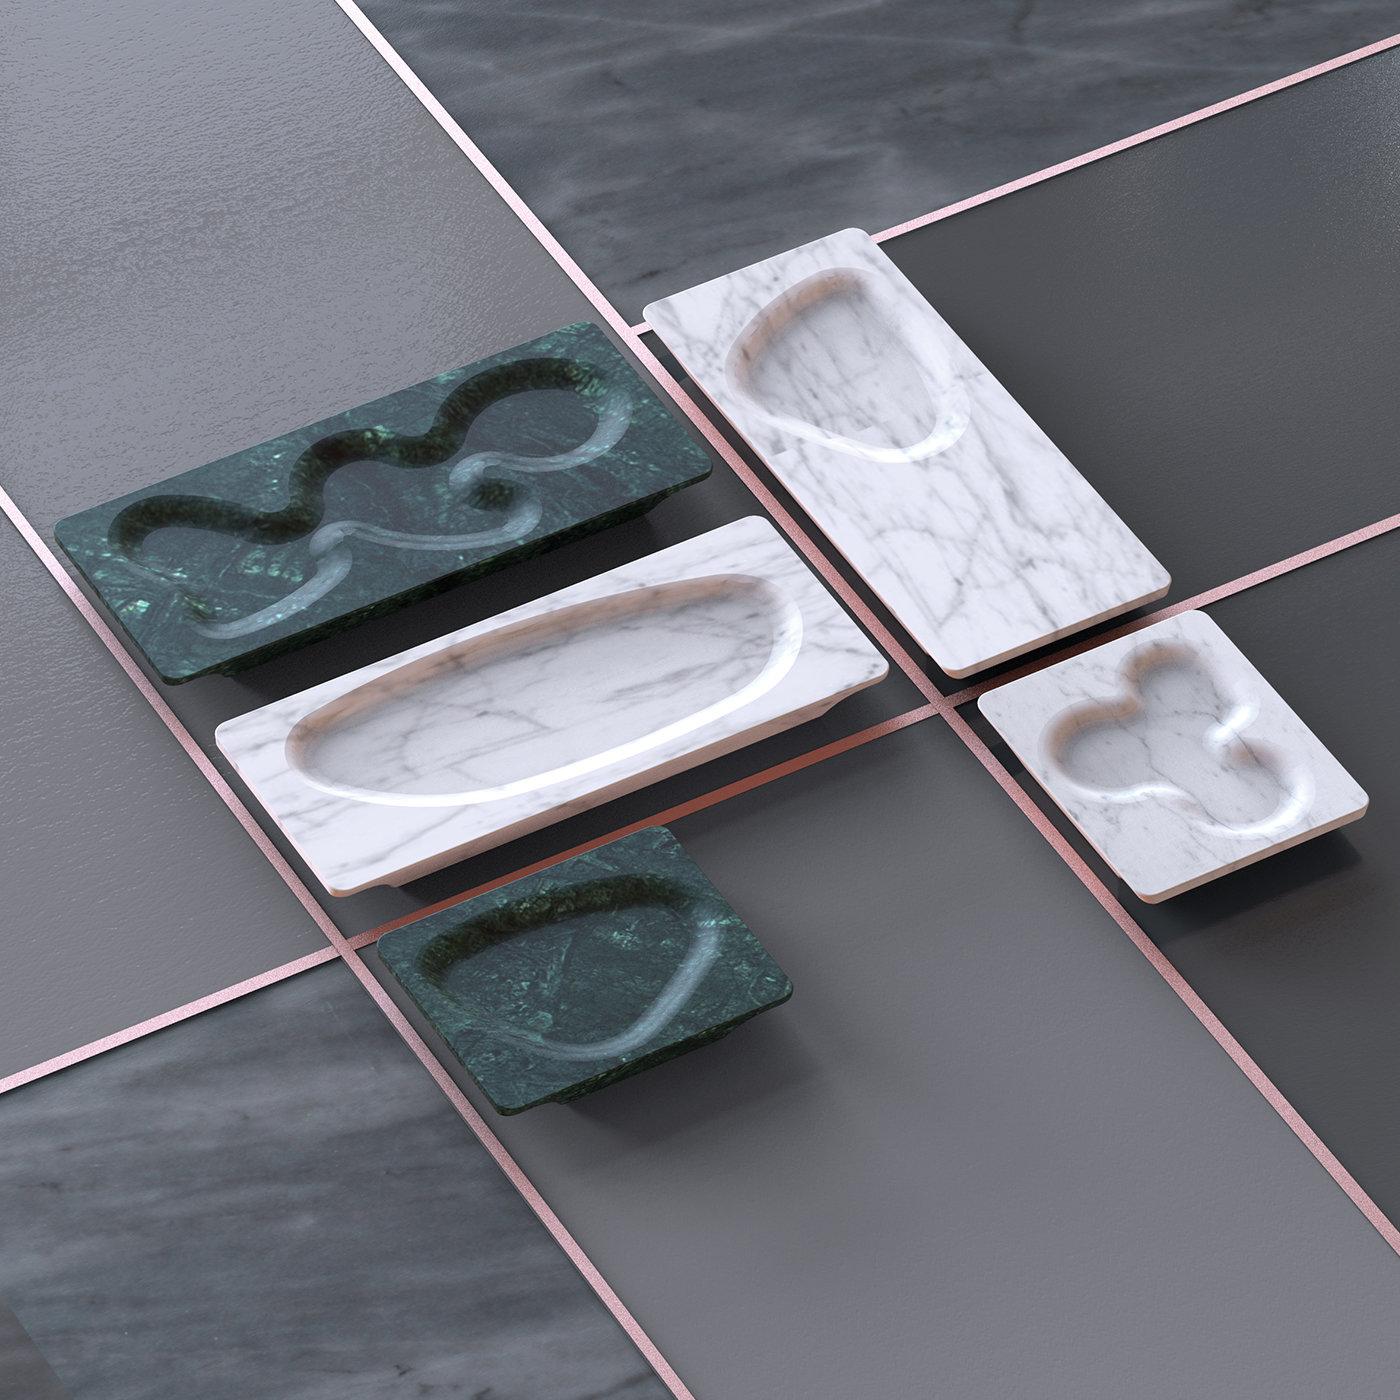 In a single piece of Verde Imperial marble, the Venerli Appetizer Tray is an original way to frame your latest culinary creations. Featuring a unique carving with fluid lines, the tray helps prevent spillage while providing a unique piece of eye